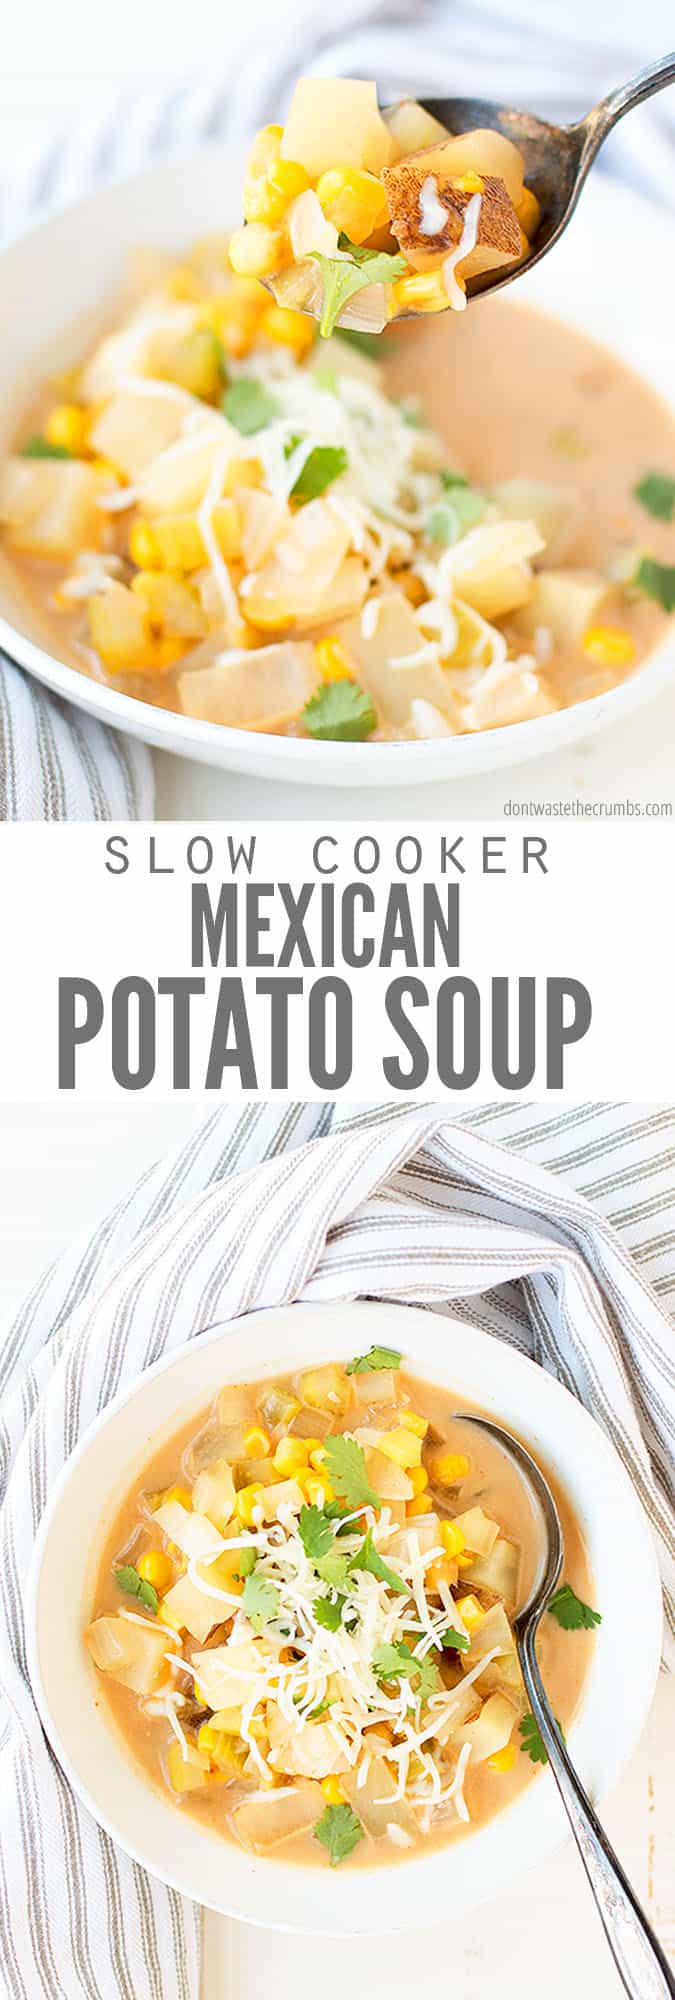 Slow Cooker Mexican Potato Soup - Don't Waste the Crumbs